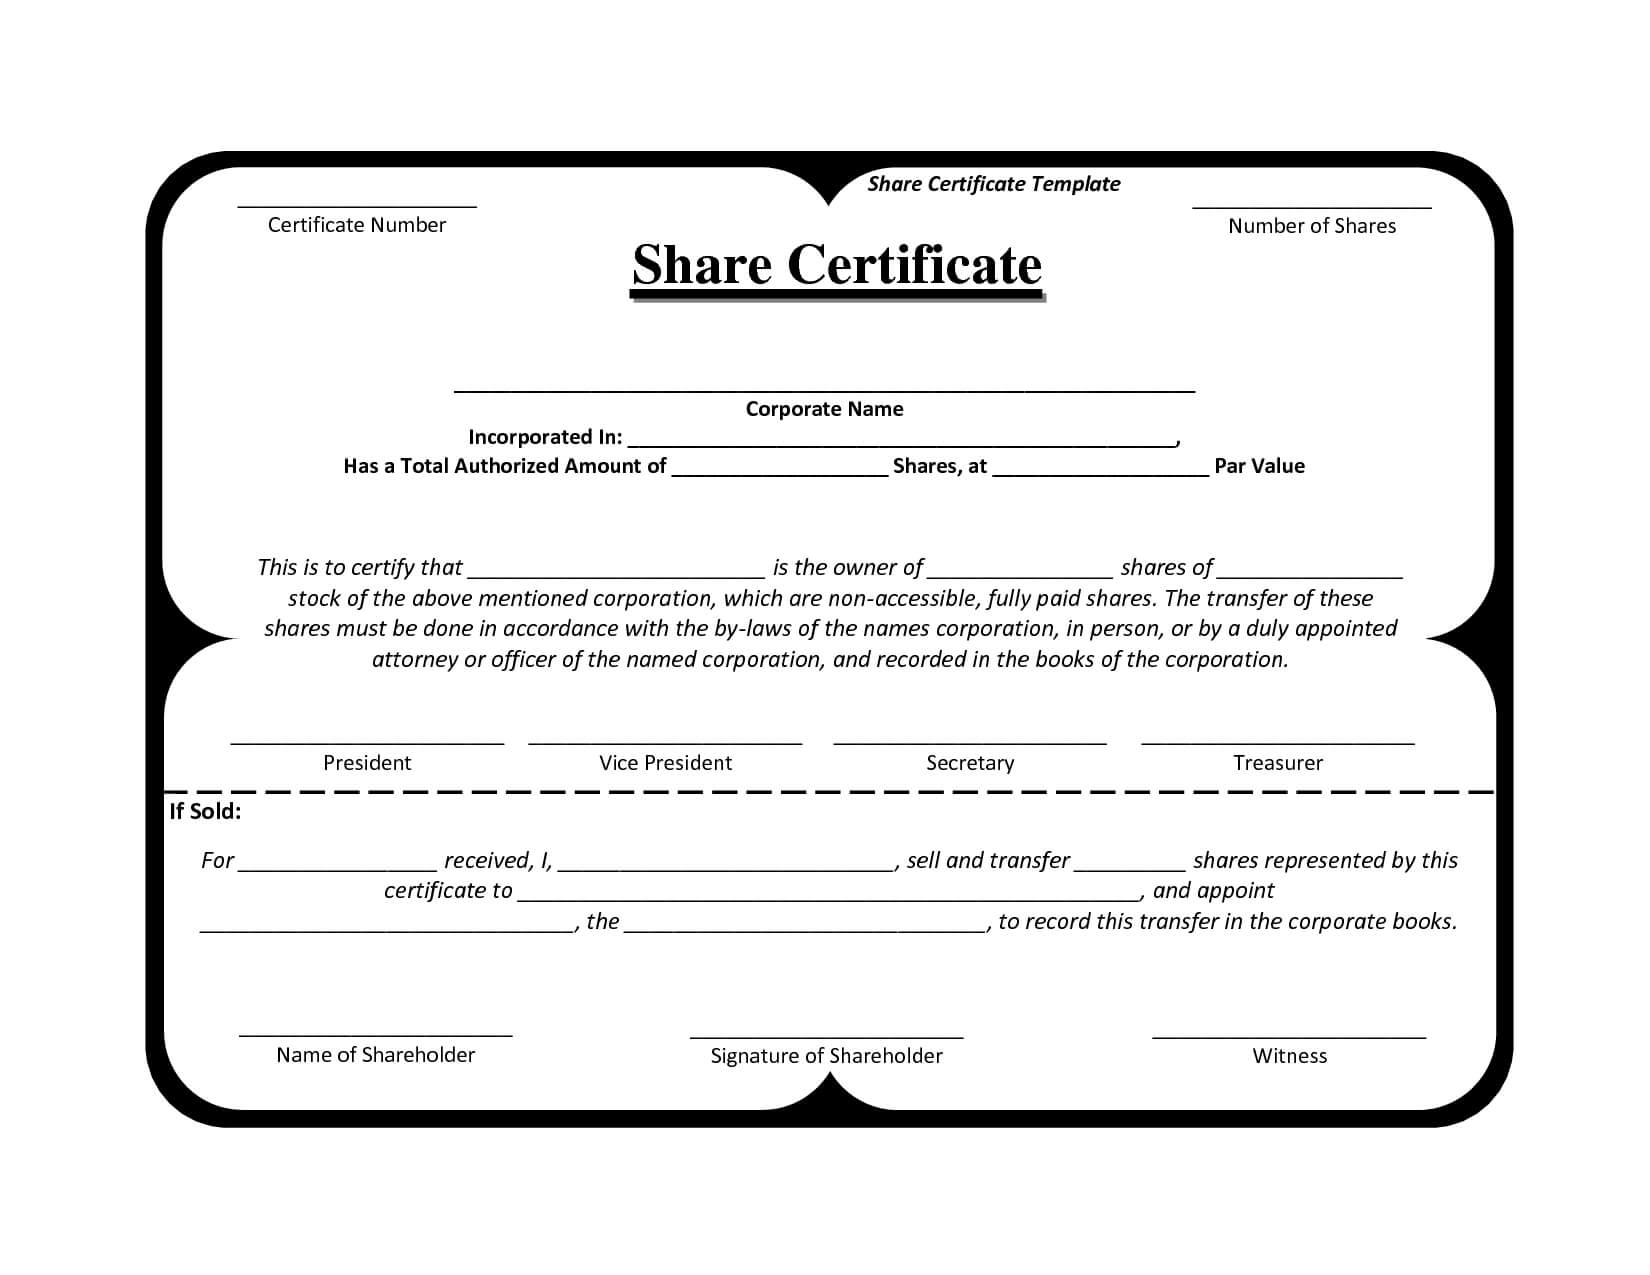 Template Share Certificate Rbscqi9V | Certificate Templates Intended For Blank Share Certificate Template Free